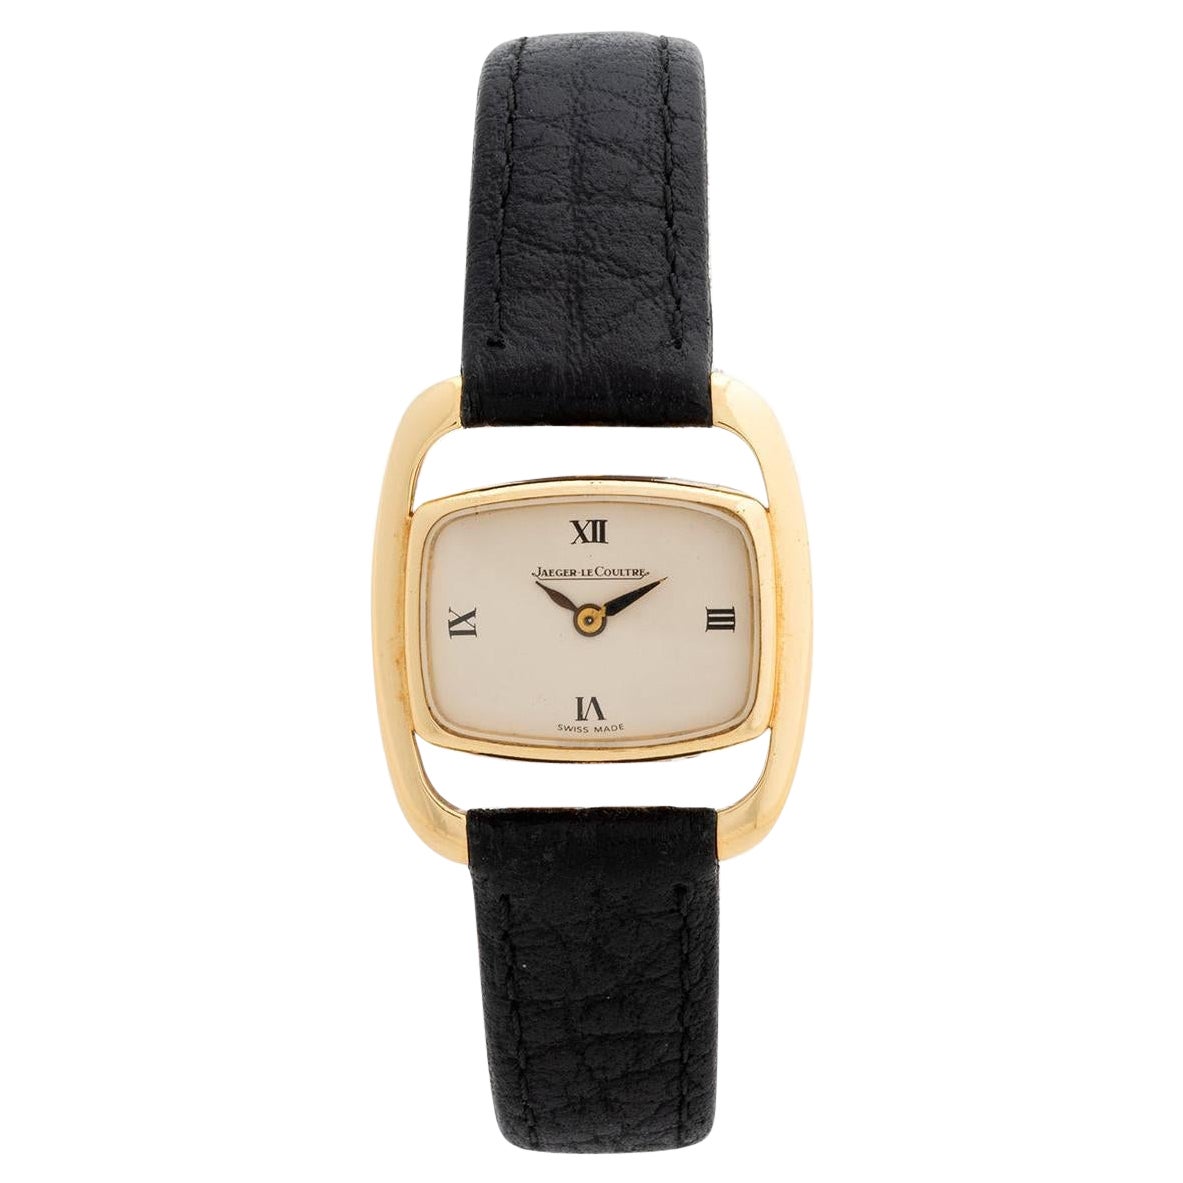 Jaeger-LeCoultre Ladies Etrier, Circa 1970, 'Hermes and the Luchetto' Wristwatch